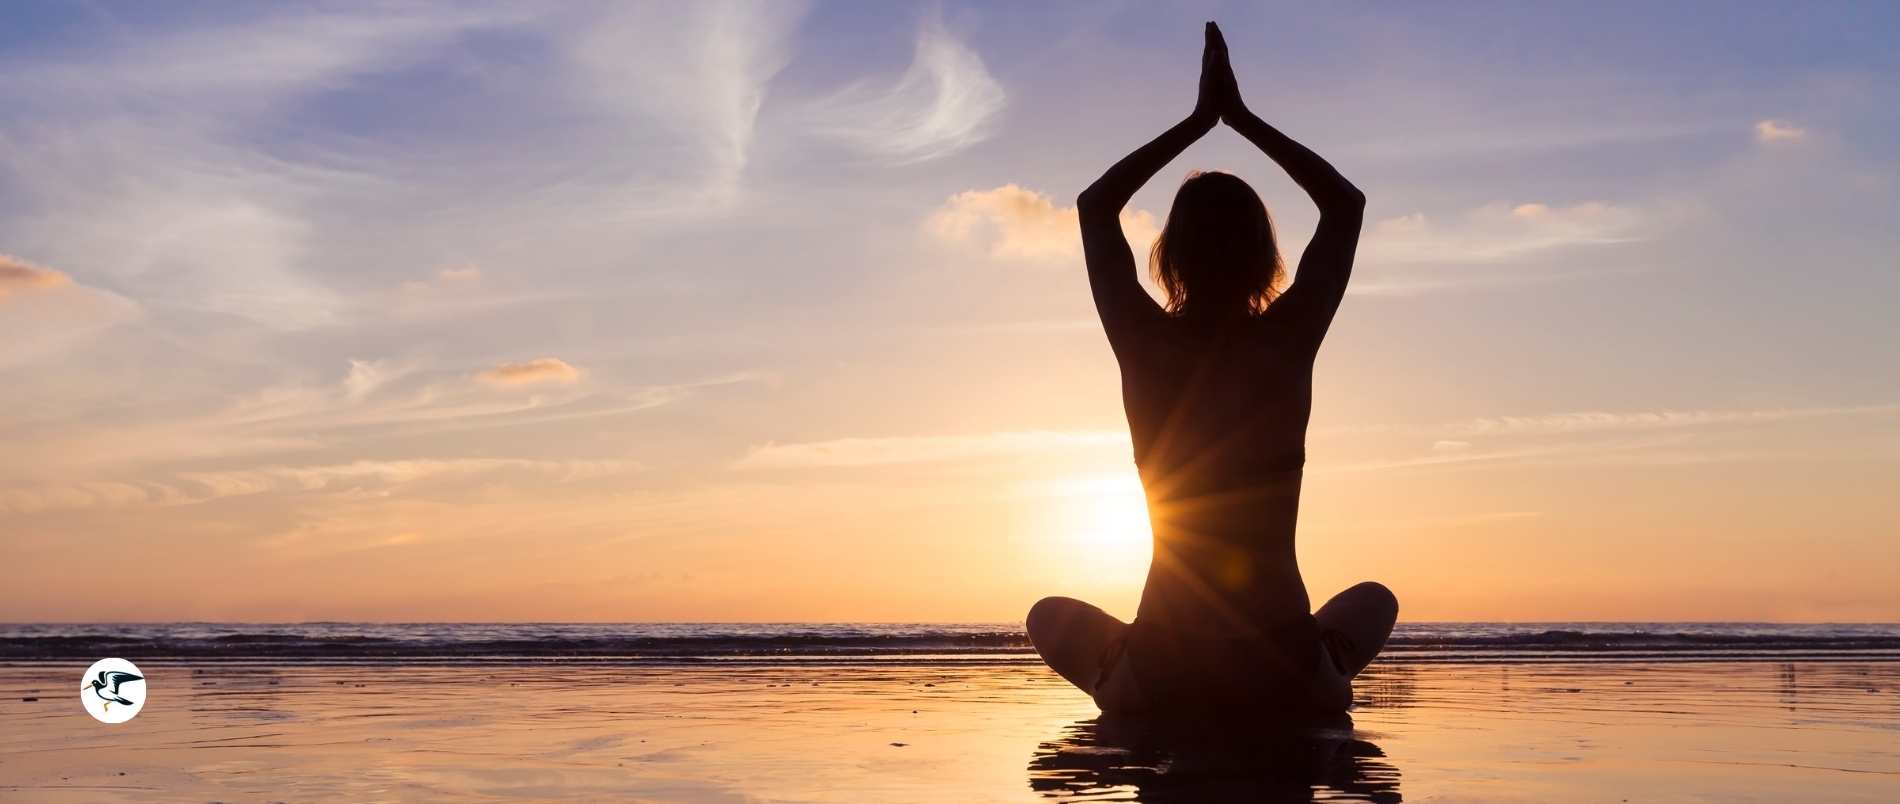 Person in yoga pose on the beach at sunset